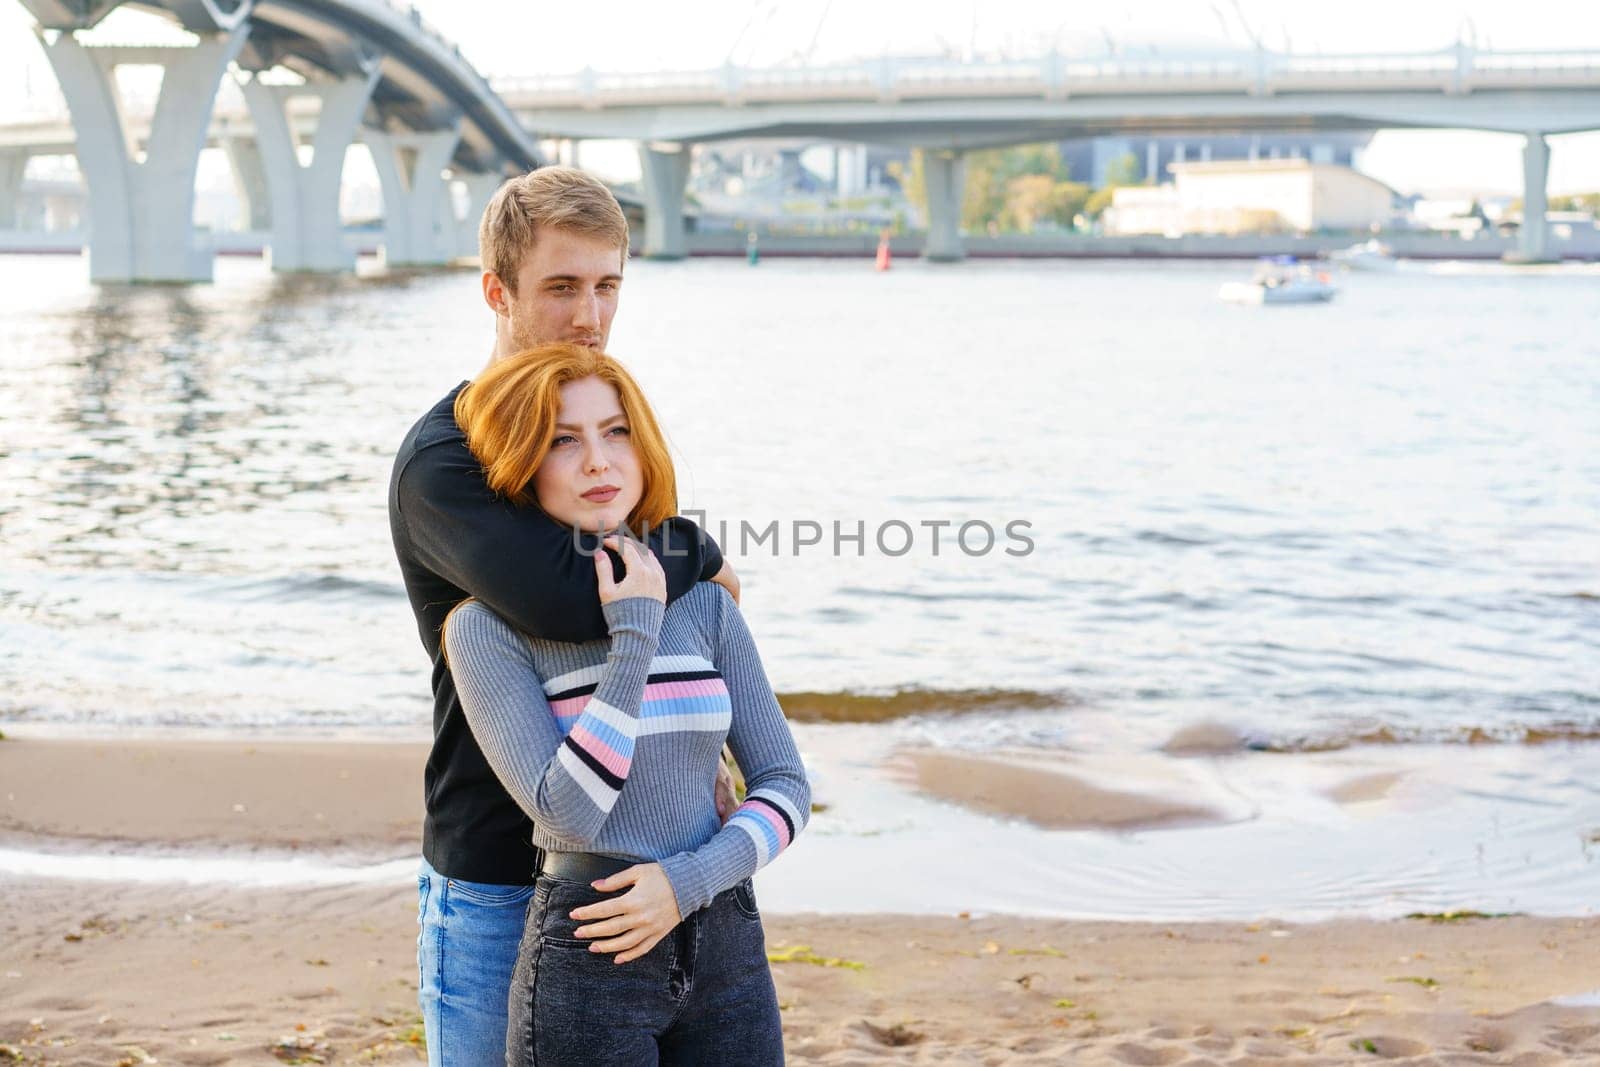 Young couple of man and woman with long red hair of Caucasian ethnicity, in casual clothes, stand on the bank of the river embracing happy on a summer day against the background of the cityscape